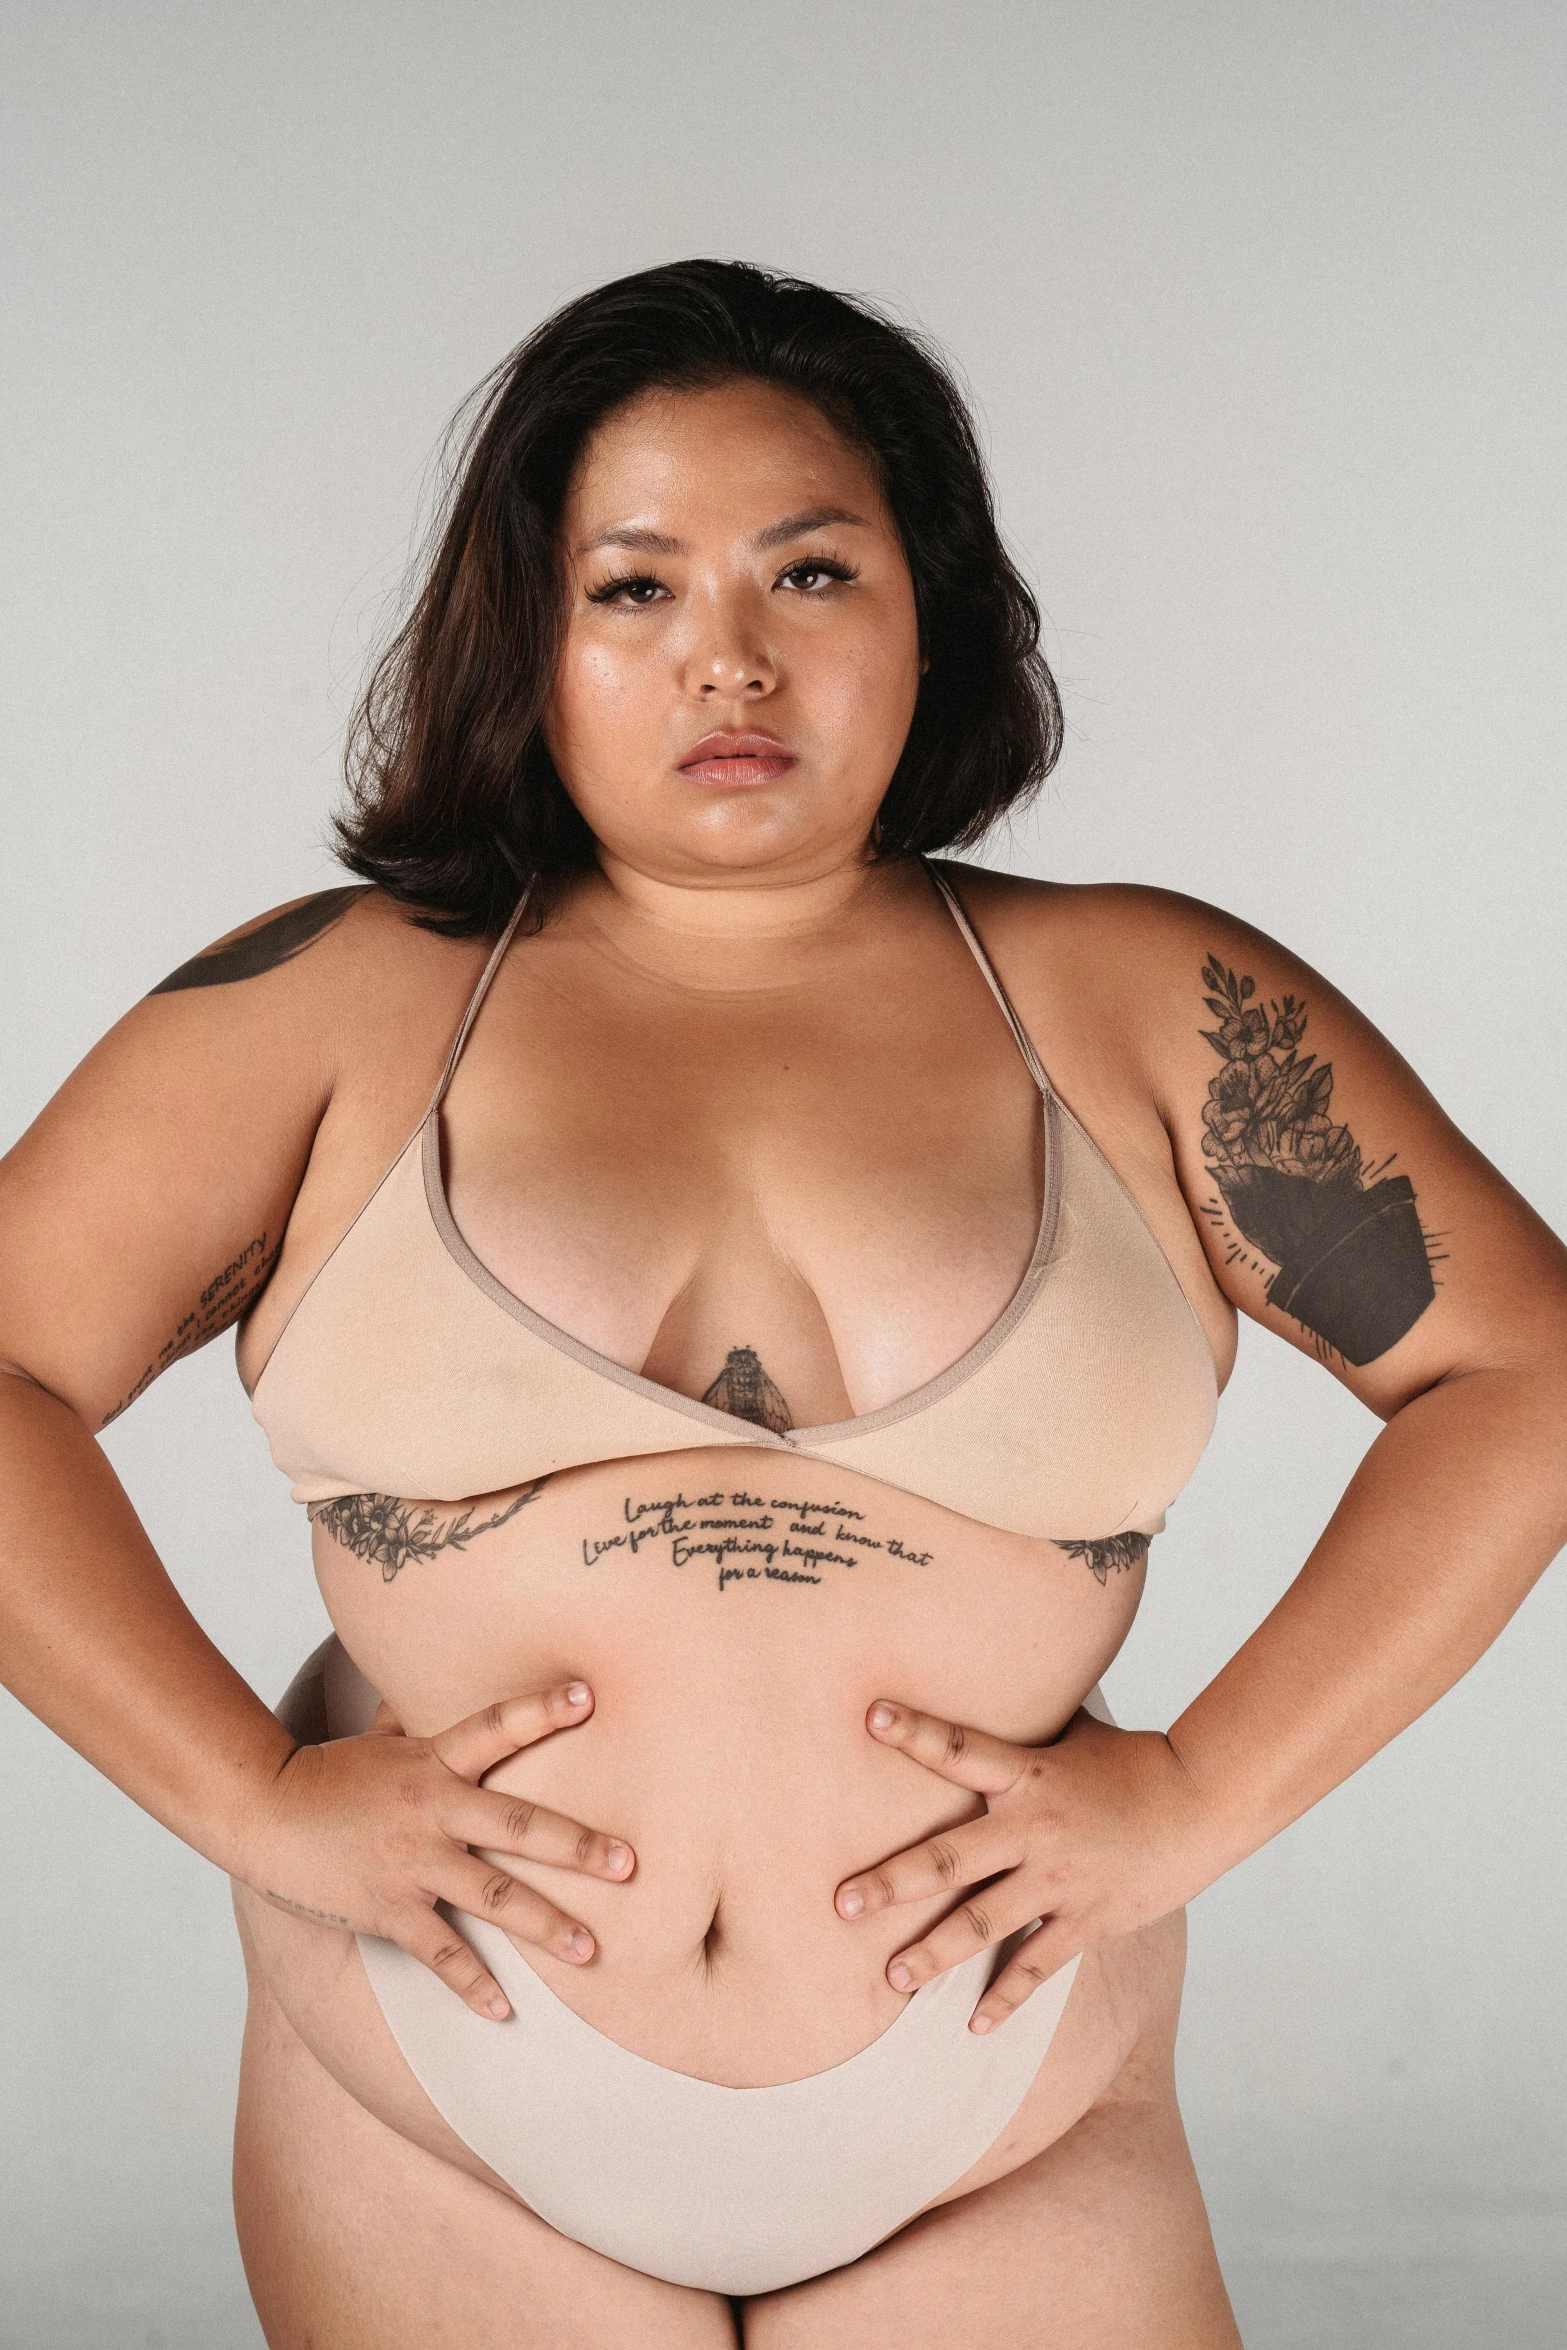 a woman in a bikini posing for a picture, a tattoo, inspired by Ruth Jên, an overweight, wearing bra, promo photo, her skin is light brown